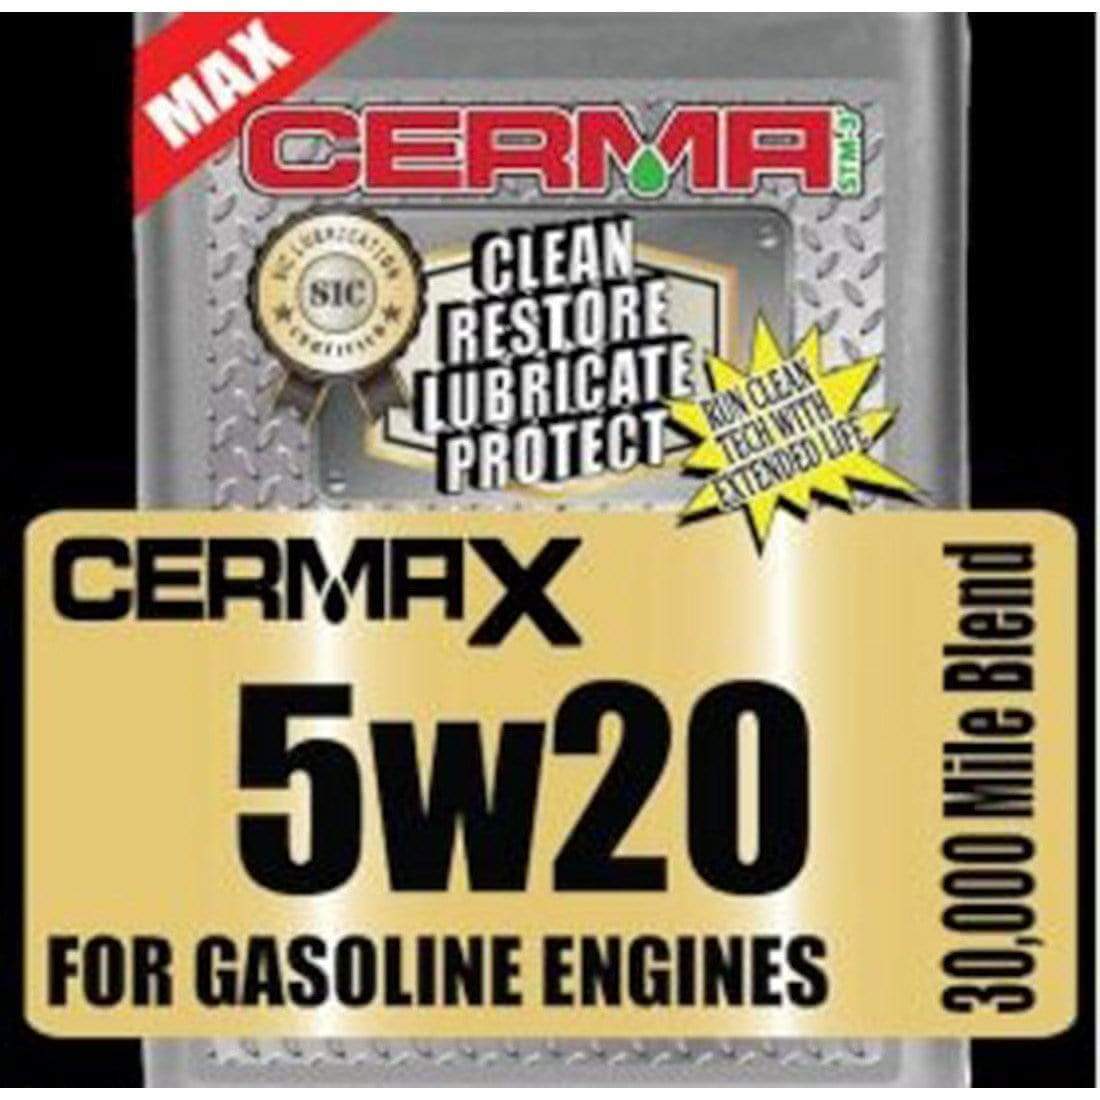 Cermax Ceramic 5w-20W Synthetic Motor Oil at $16.96 only from cermatreatment.com